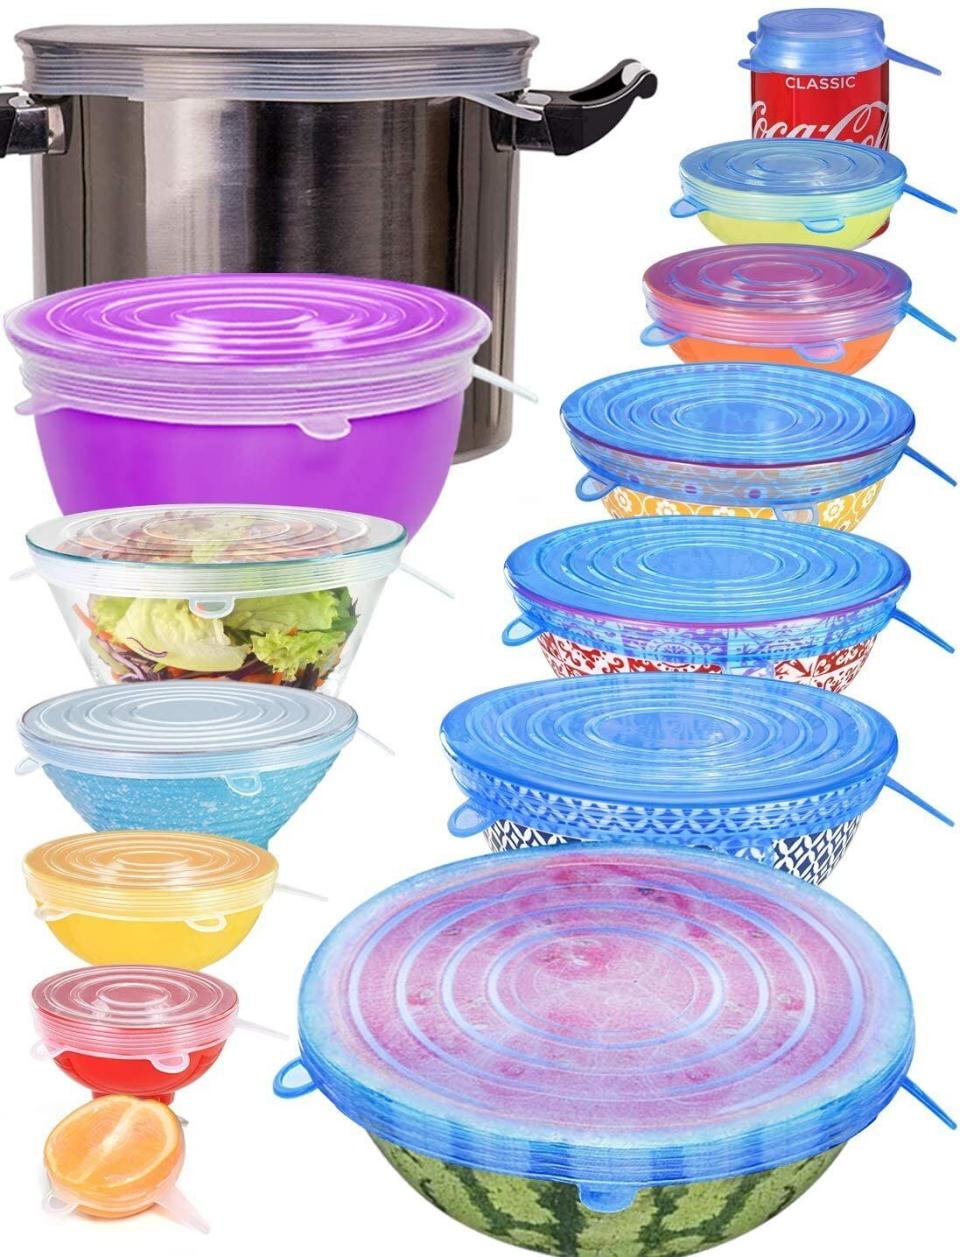 From a can of soda to a bowl of chips, this <a href="https://amzn.to/35jy169" target="_blank" rel="noopener noreferrer">set of silicone stretch lids</a> can work when you've made a meal for yourself or after you entertain guests. (Amazon)